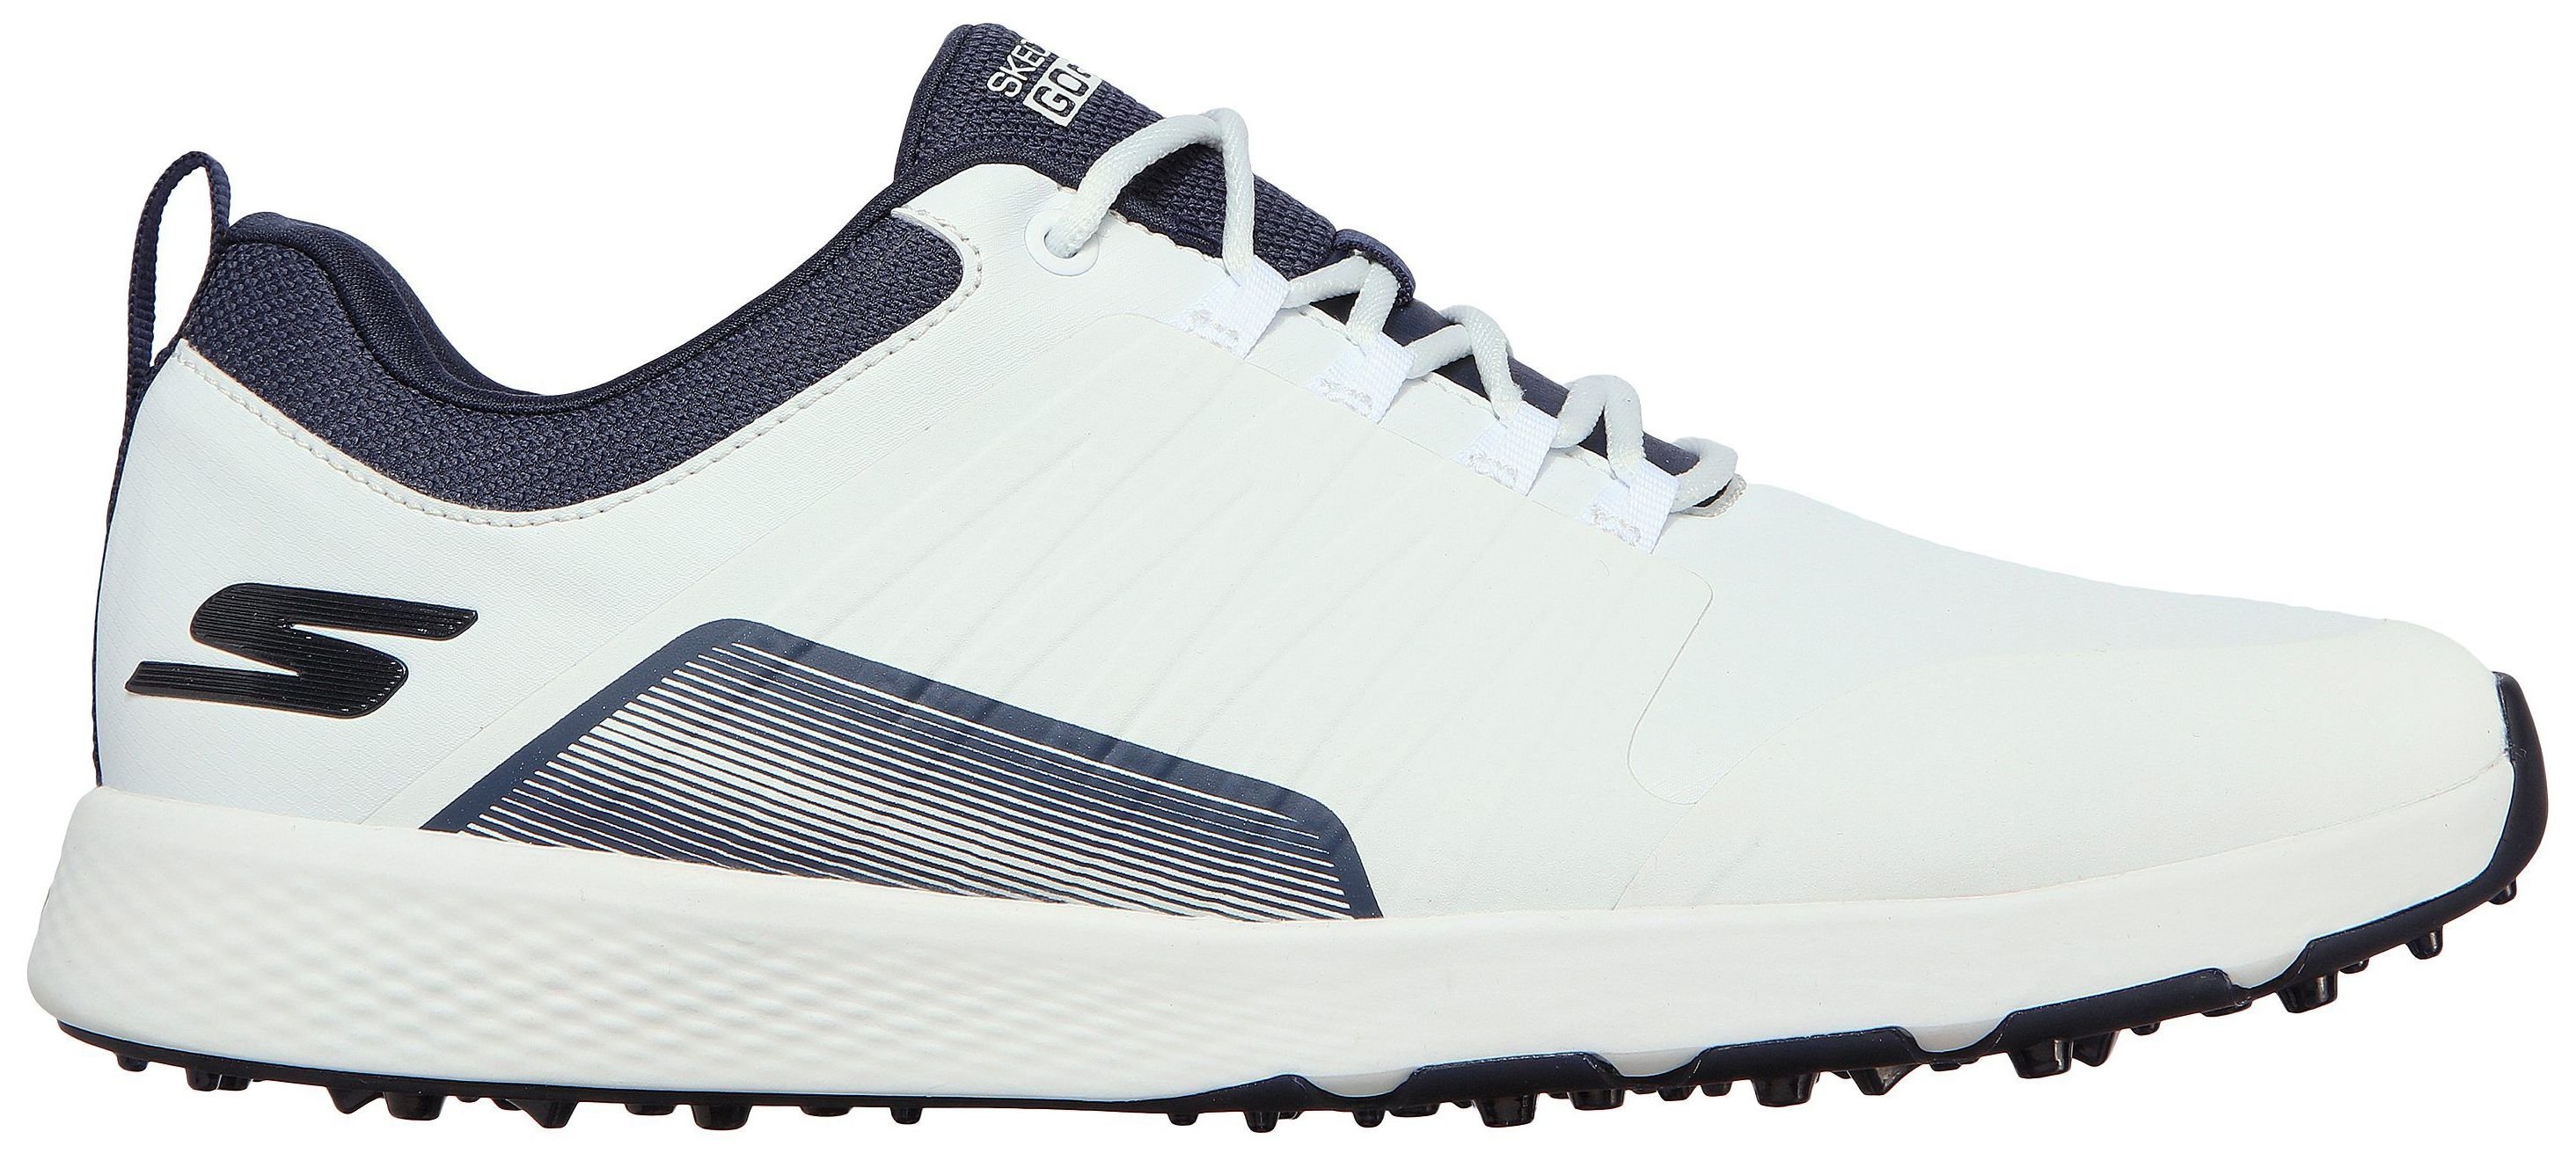 Skechers GO 4 Victory Golf Shoes White/Navy ON - Carl's Golfland